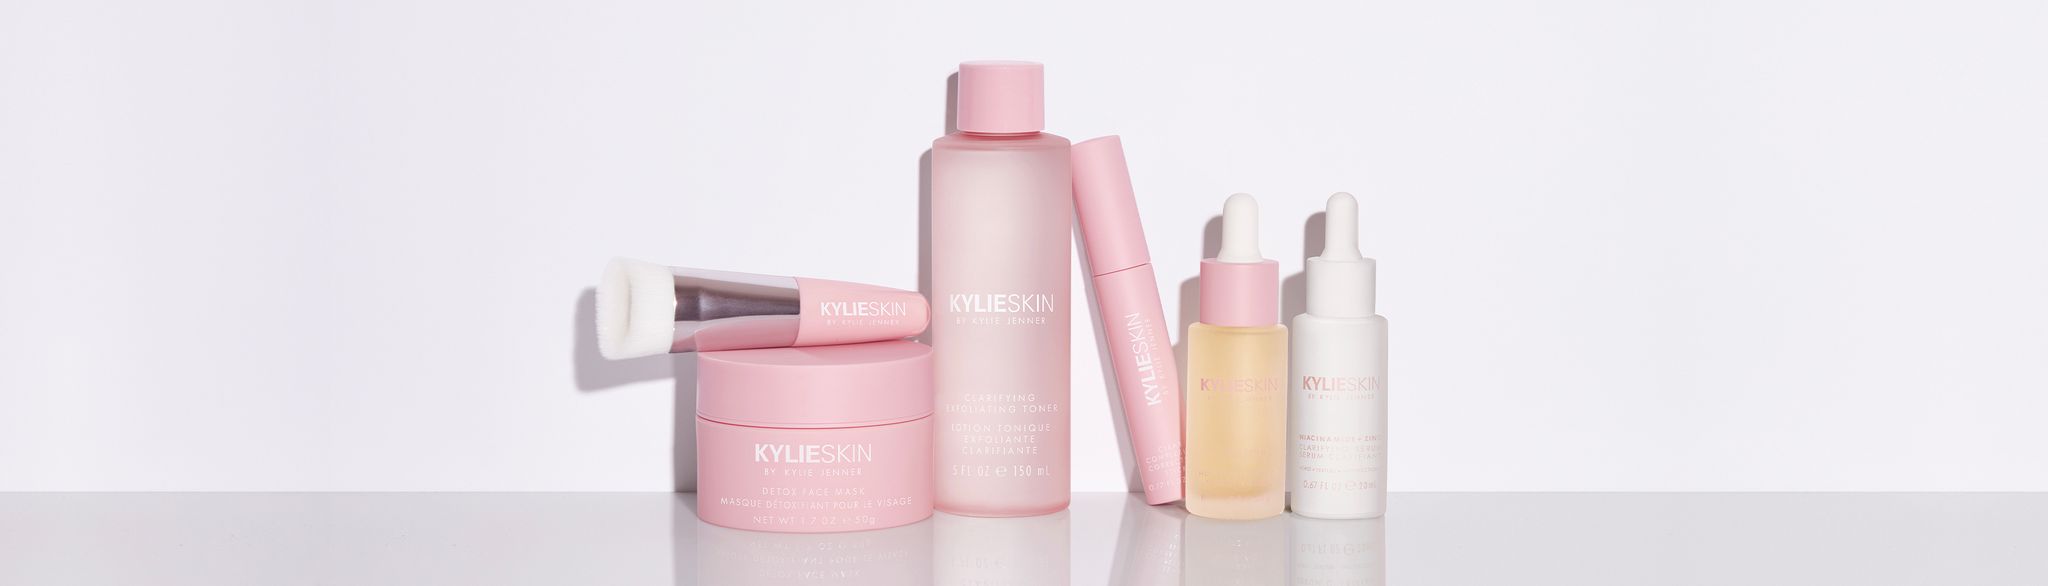 Kylie Skin - Collection - Clear & Clarify